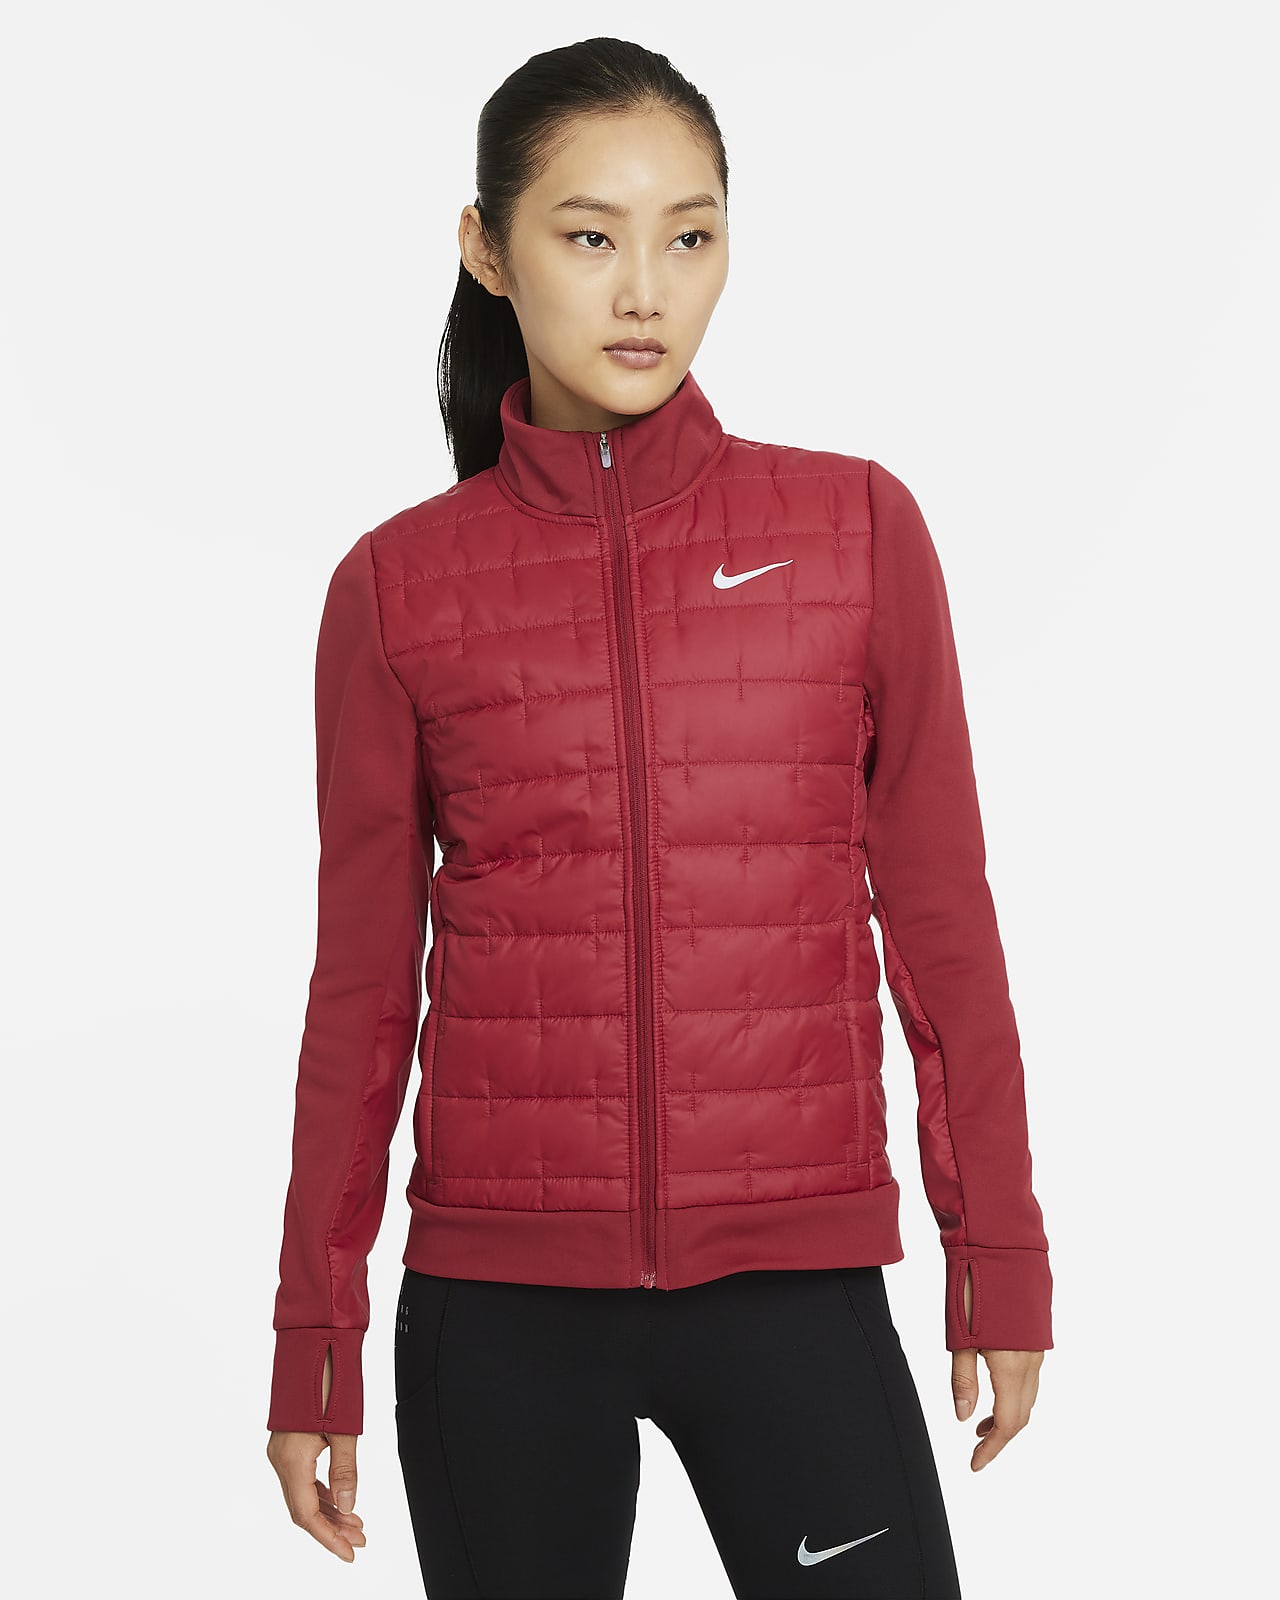 Chamarra de relleno sintético para mujer Nike Therma-FIT